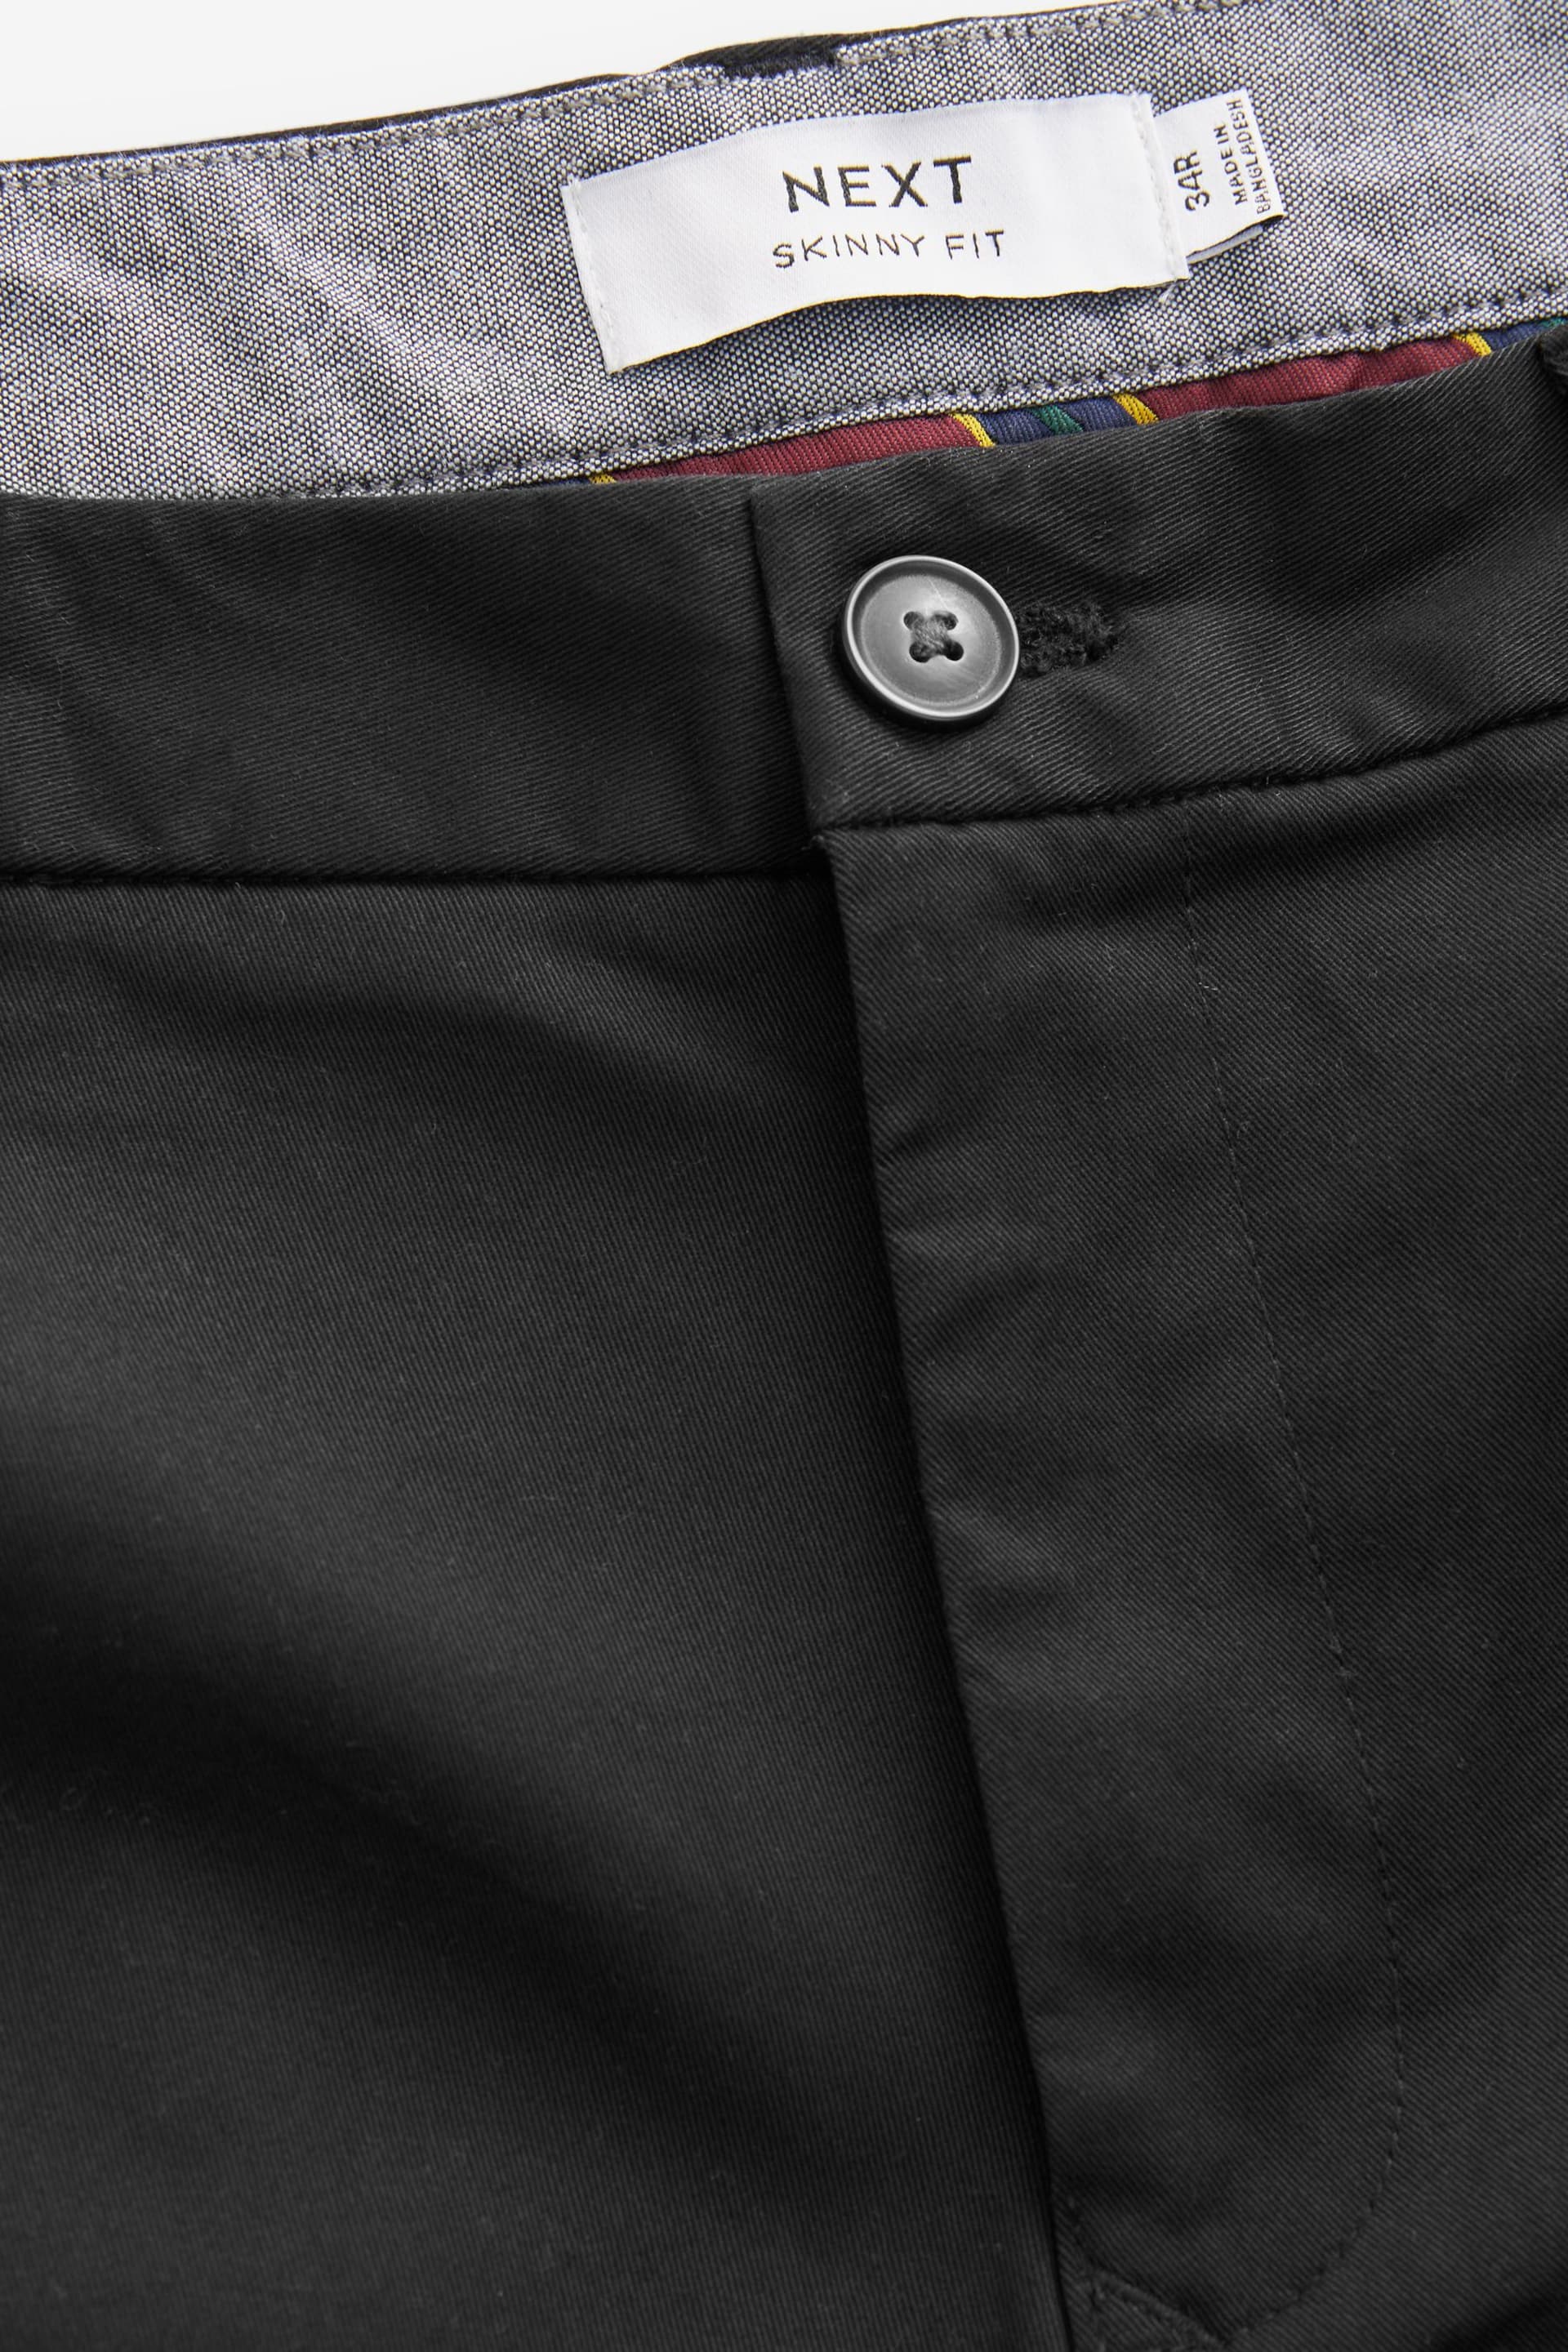 Black Skinny Stretch Chino Trousers 2 Pack - Image 9 of 9